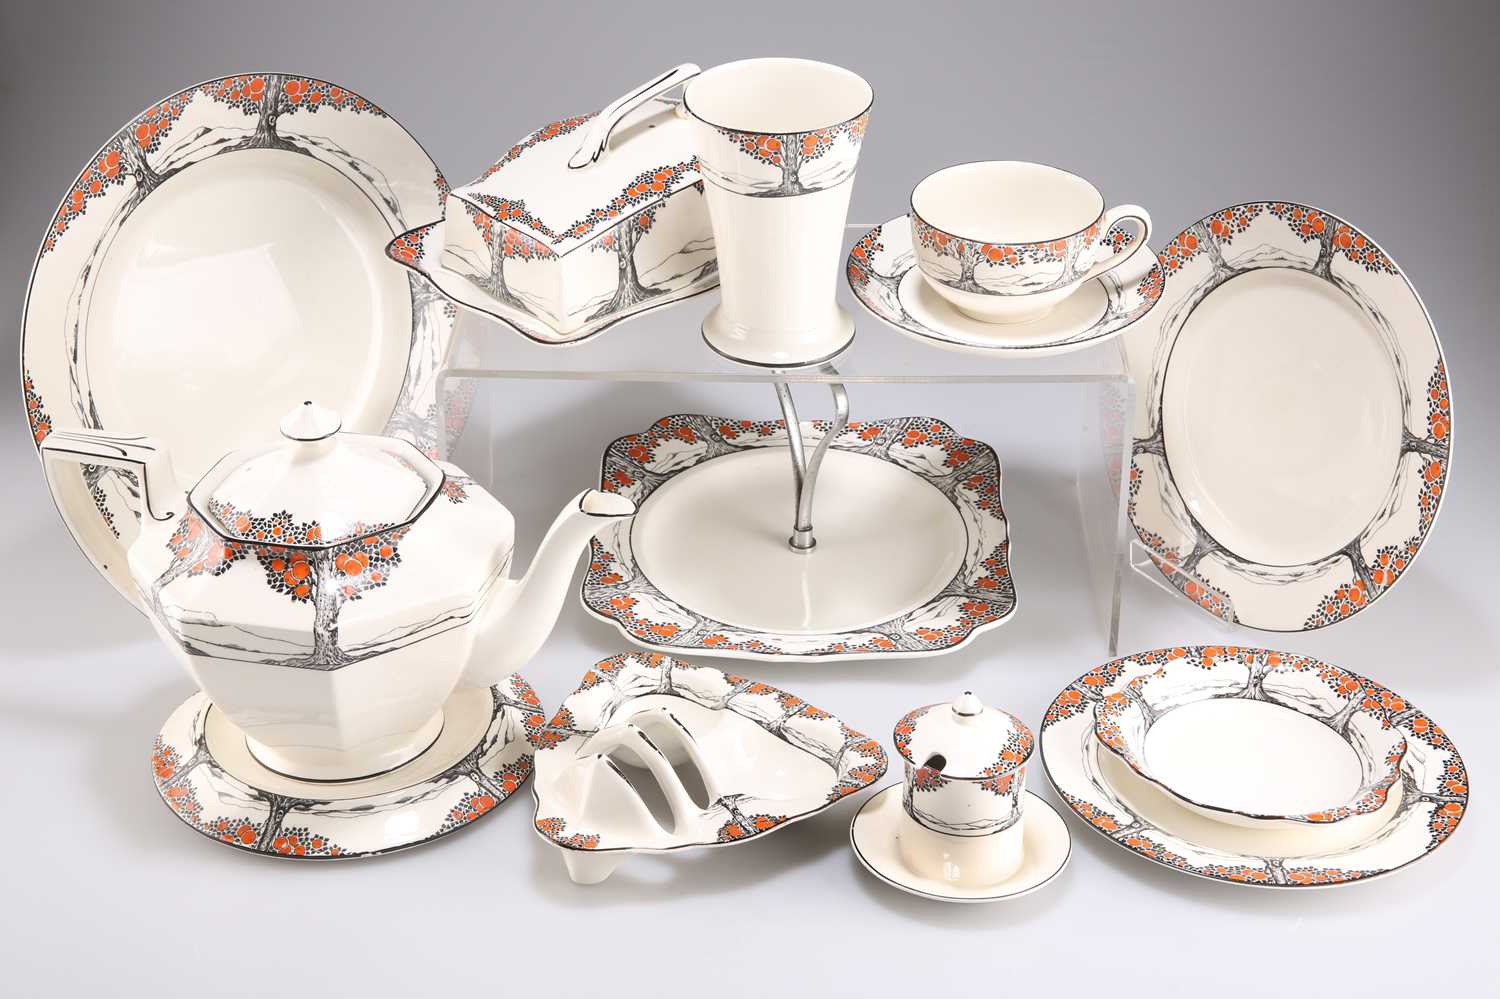 AN EXTENSIVE COLLECTION OF CROWN DUCAL ORANGE TREE PATTERN CHINA